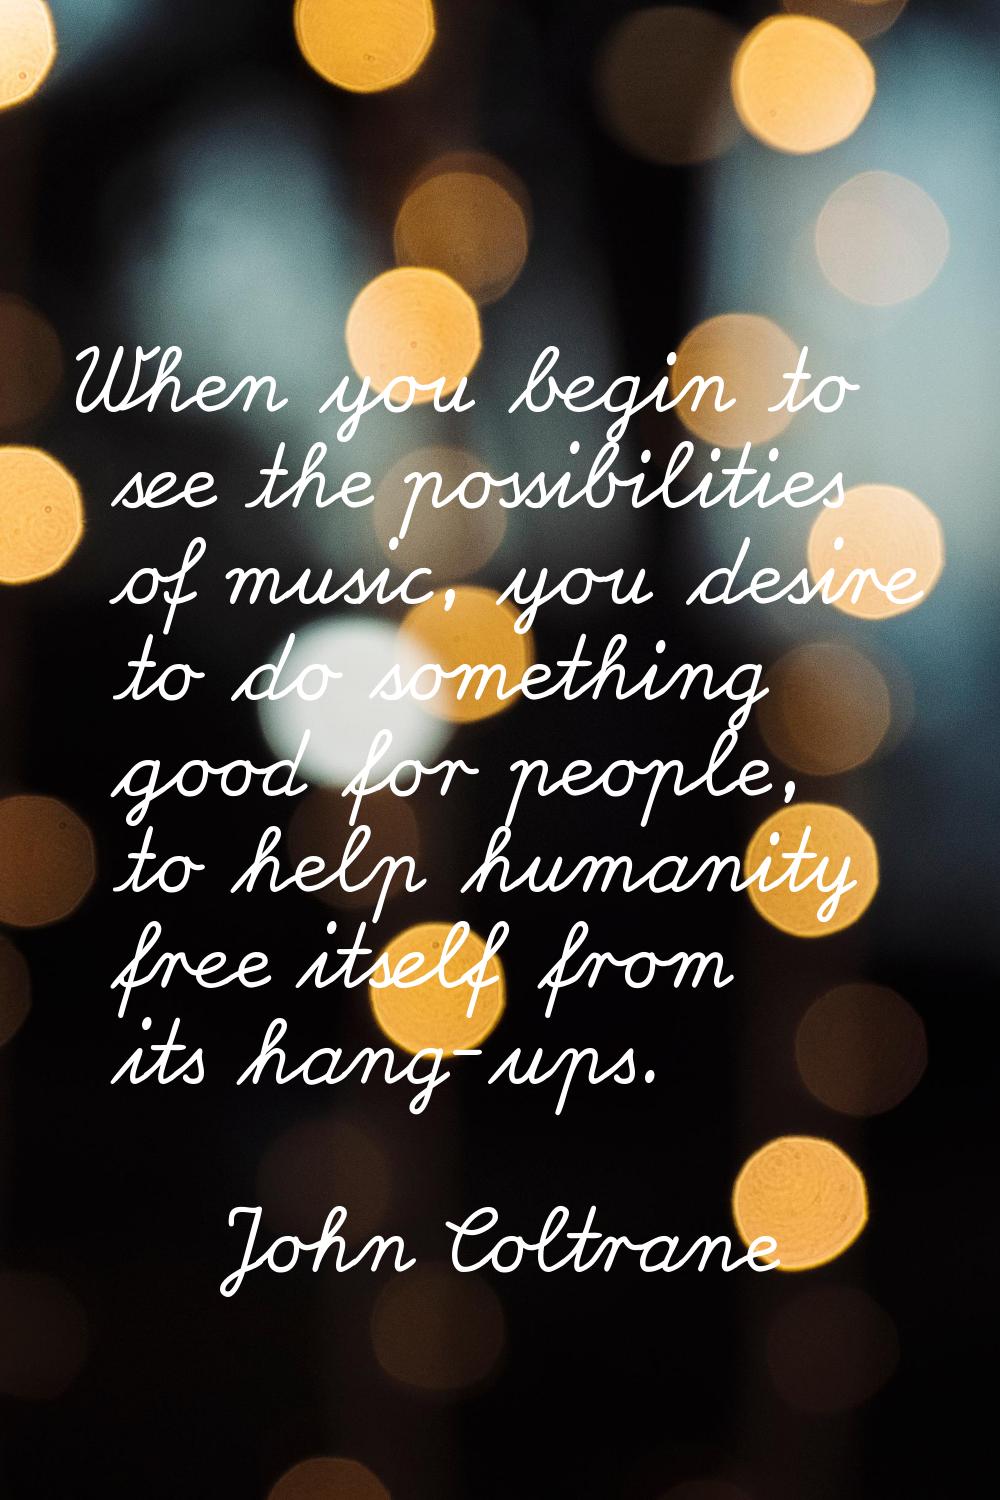 When you begin to see the possibilities of music, you desire to do something good for people, to he